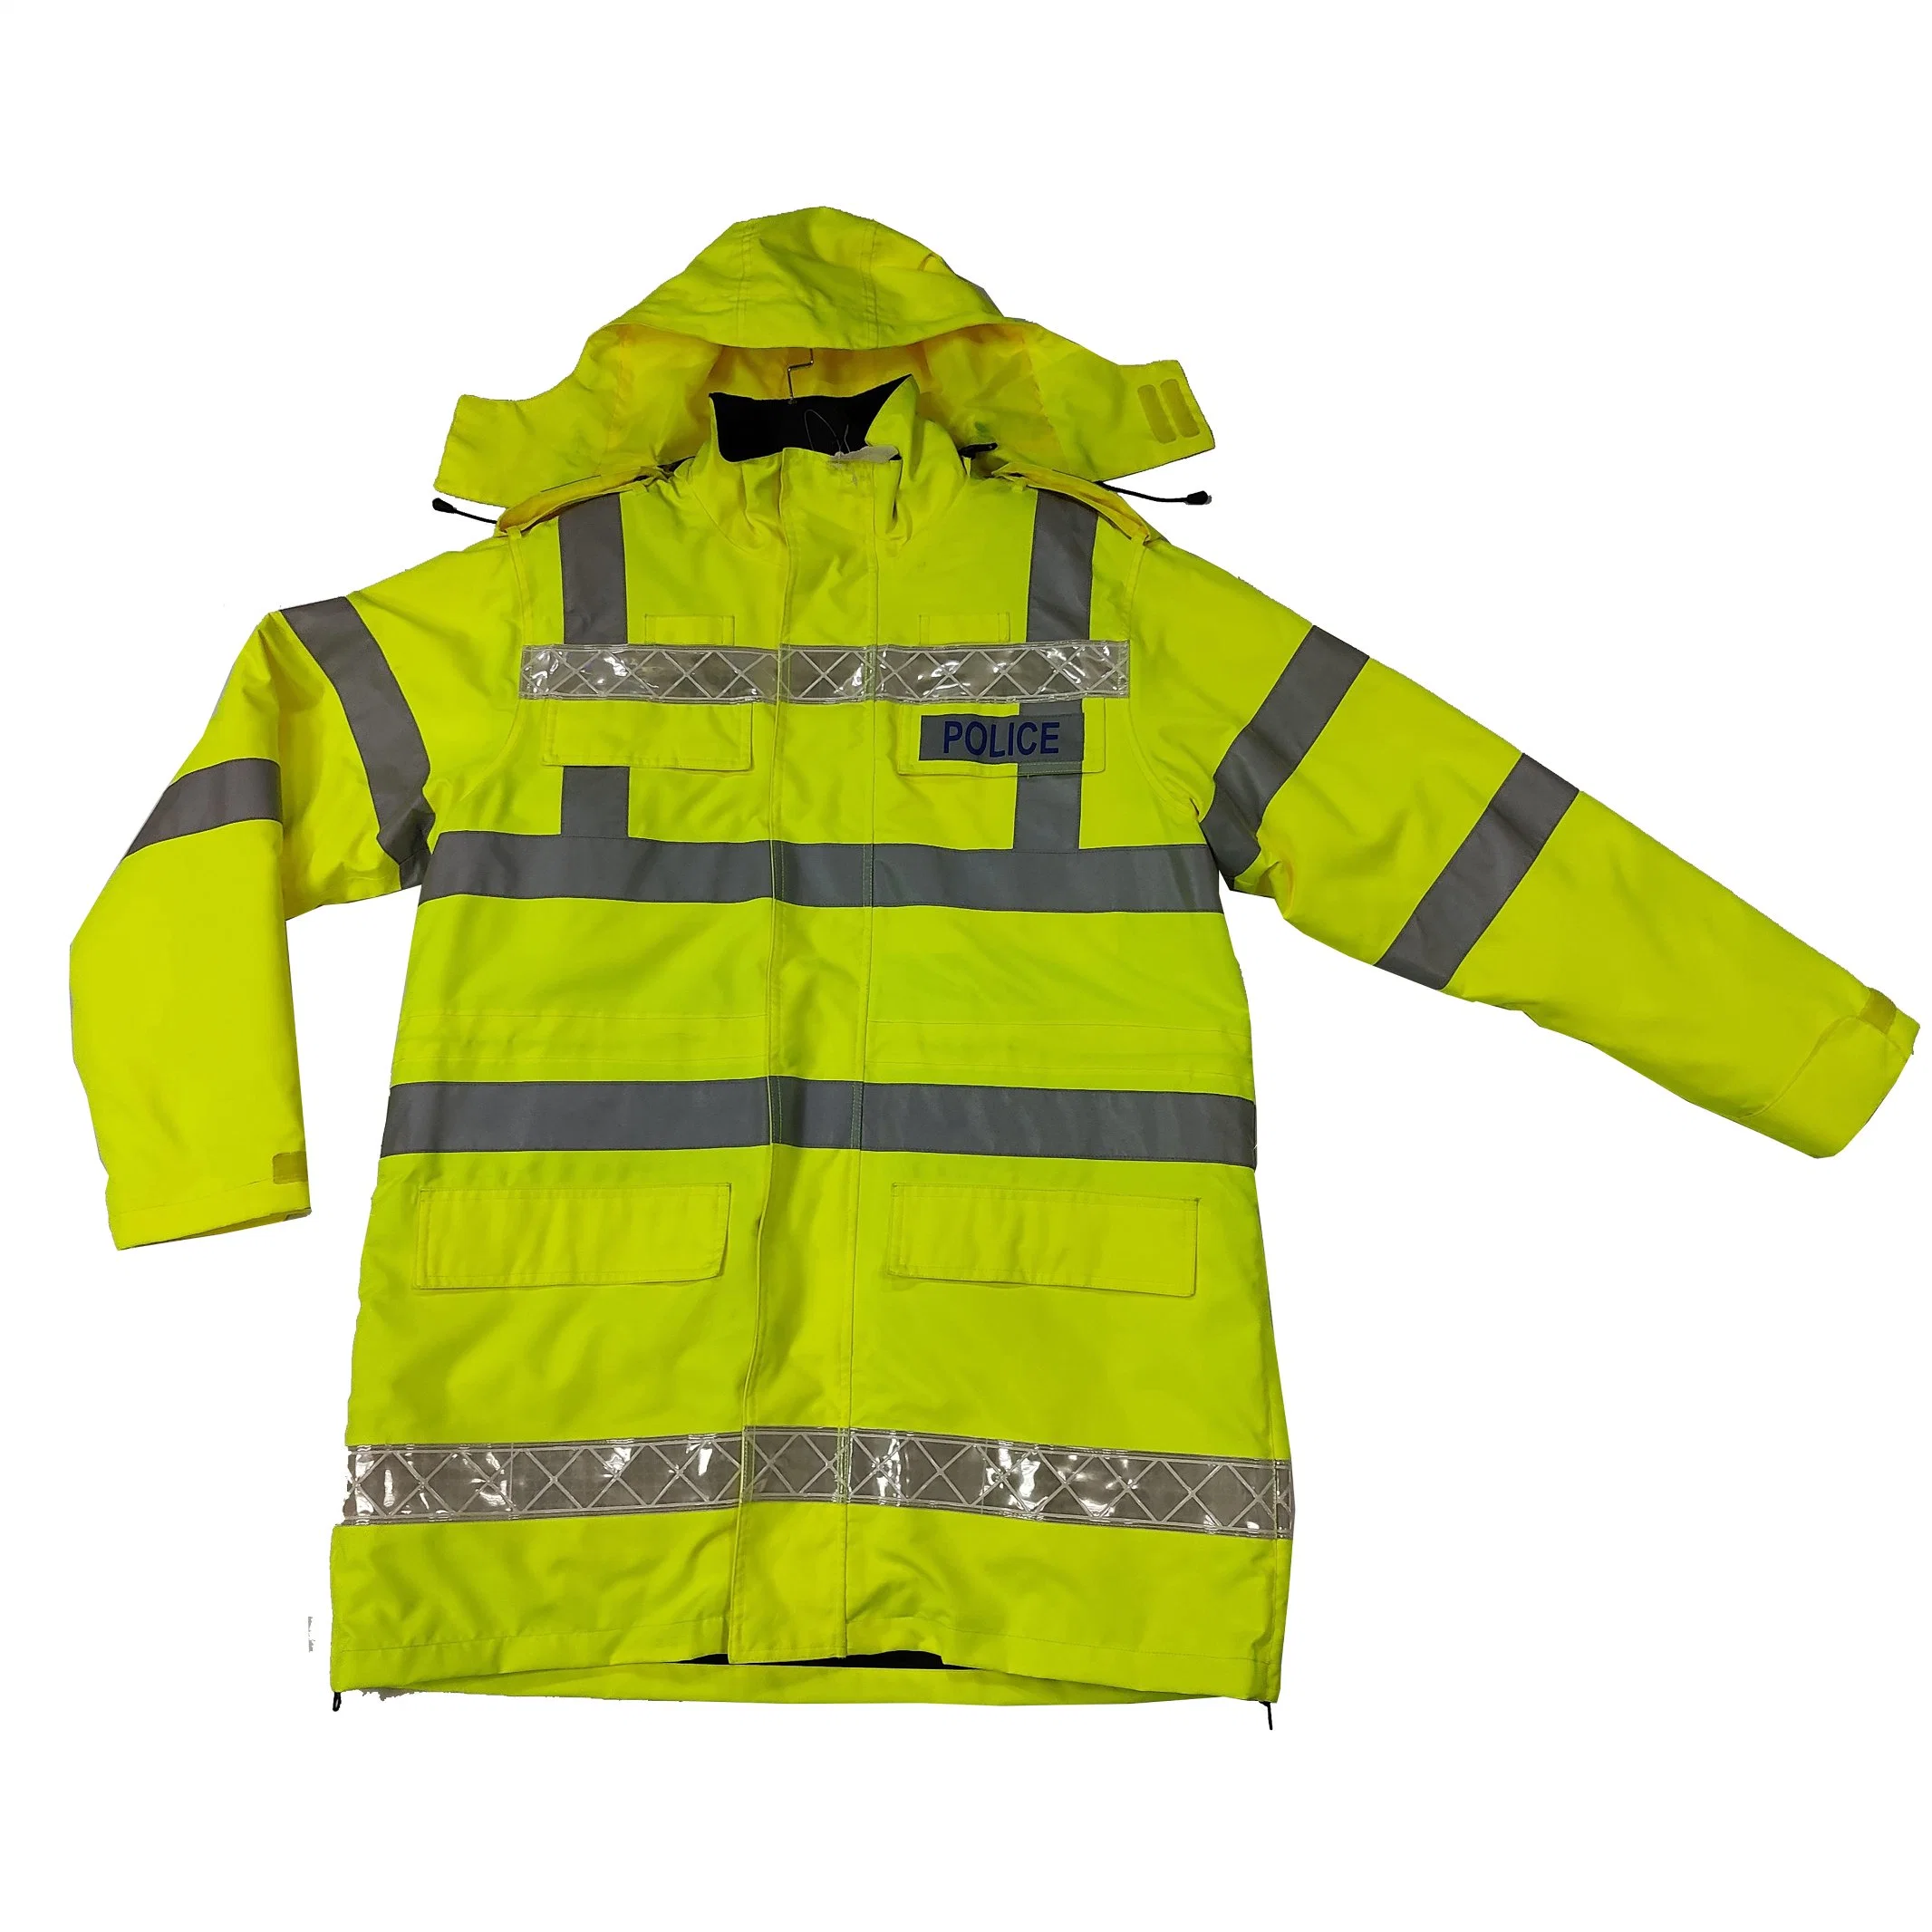 Warm High Visibility Safety Jacket